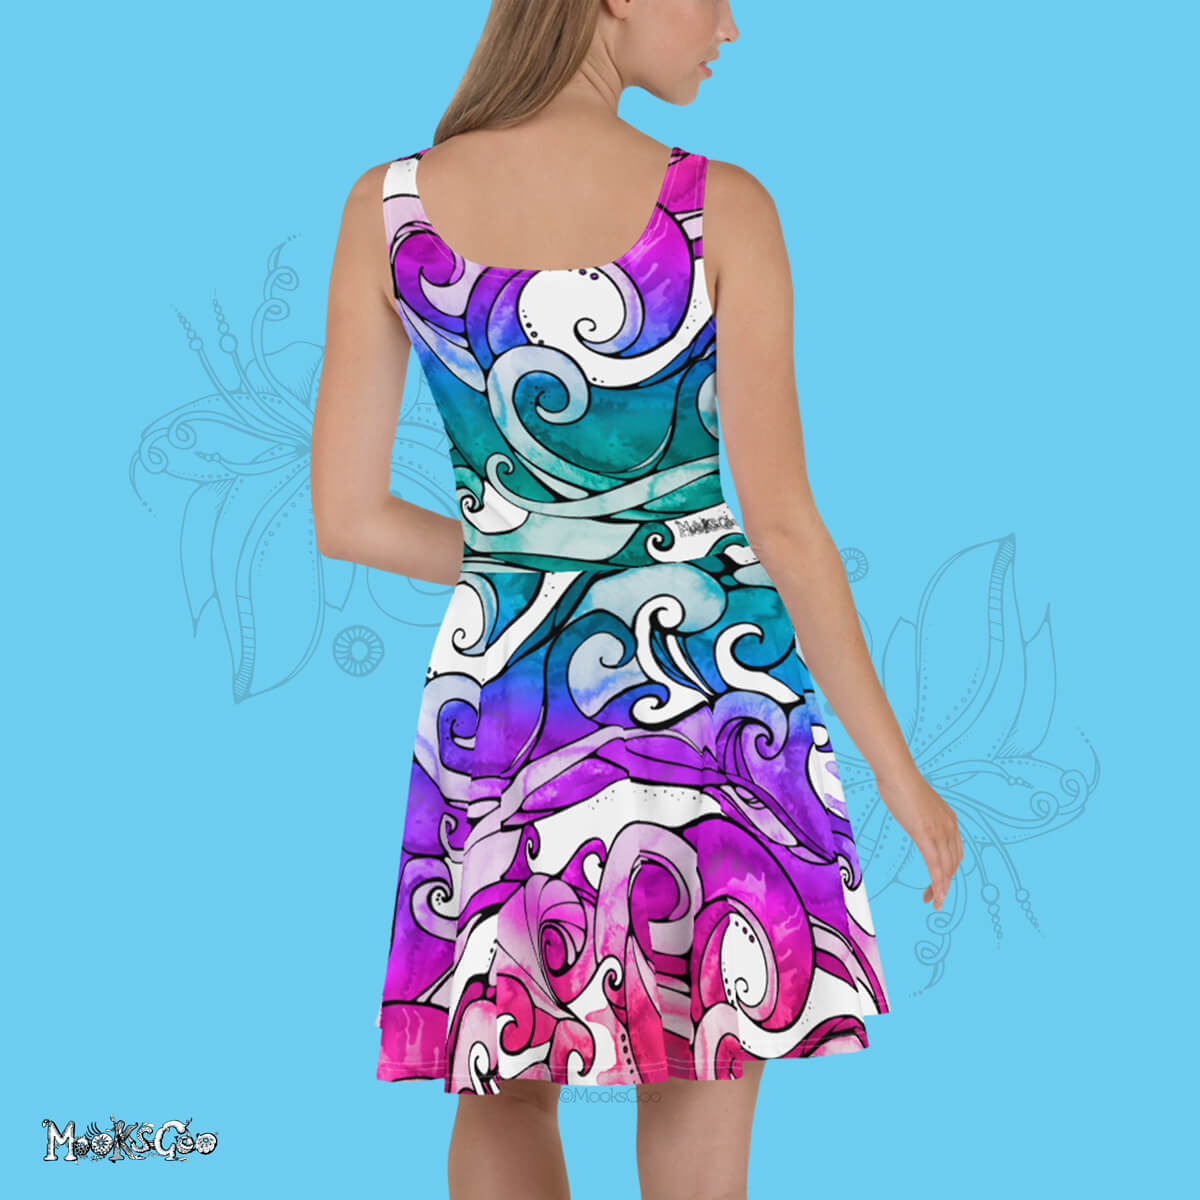 A female model facing backwards, wearing a MooksGoo original designer dress, with illustrated surfing waves with rainbow colouring